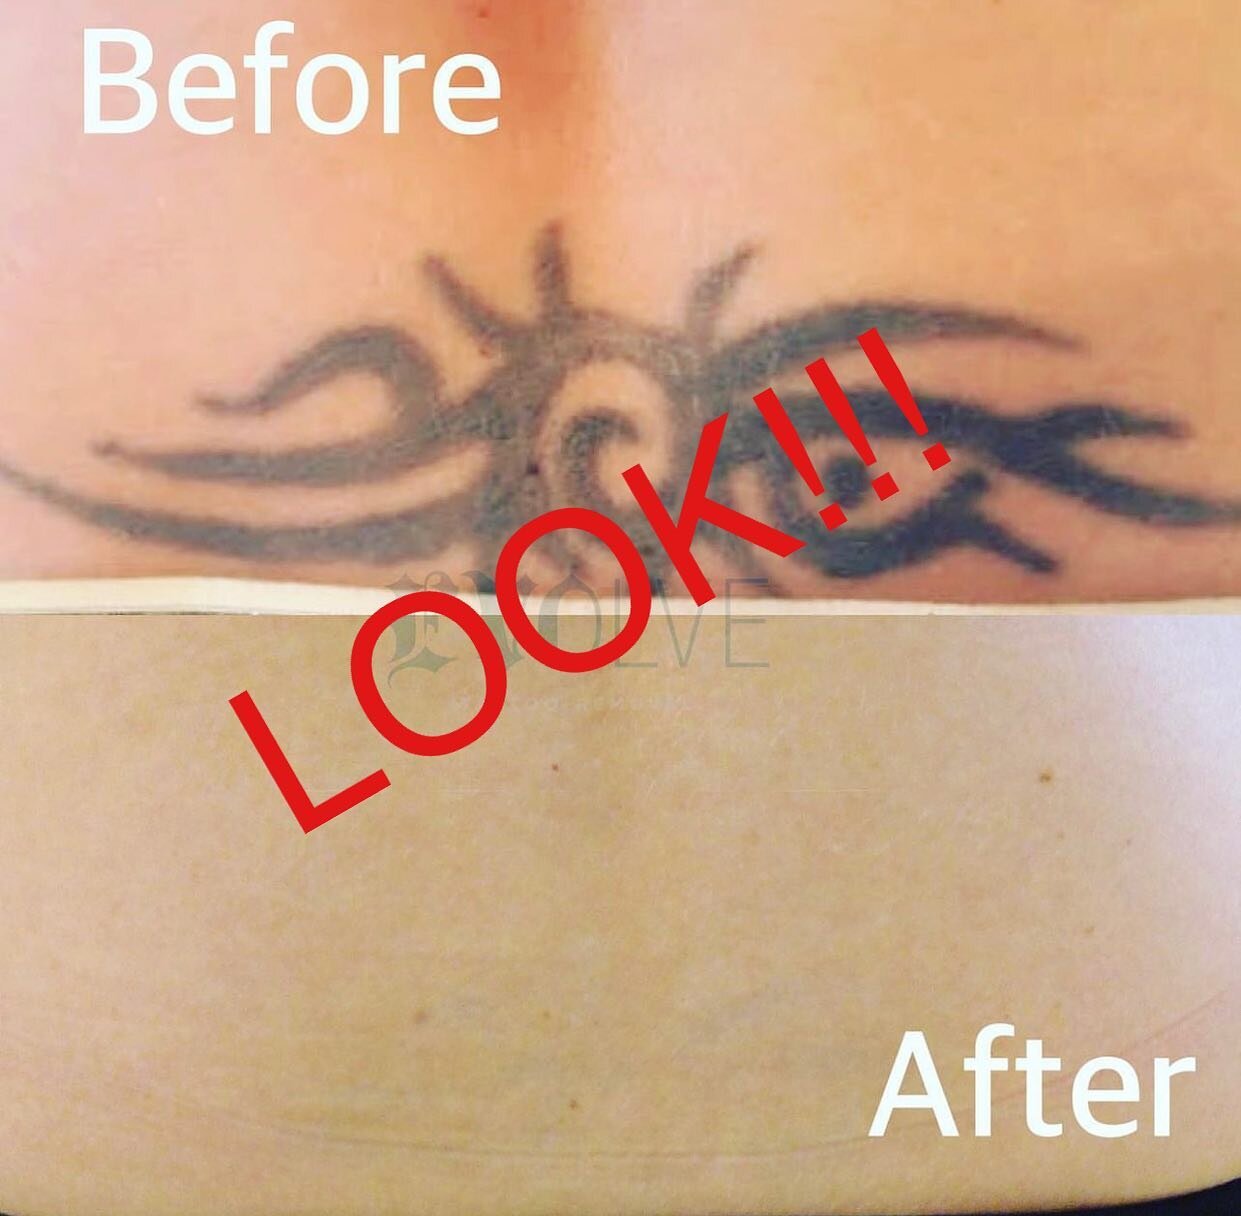 San Diego Laser Tattoo Removal Clinic - 💥💥💥 REALISTIC PROGRESS PICTURES  5 treatments SO FAR Treatments starting Only $79 Tattoo Removal Guarantee  Free Consultations Quanta Discovery Pico Laser Technology 11 years  Experience